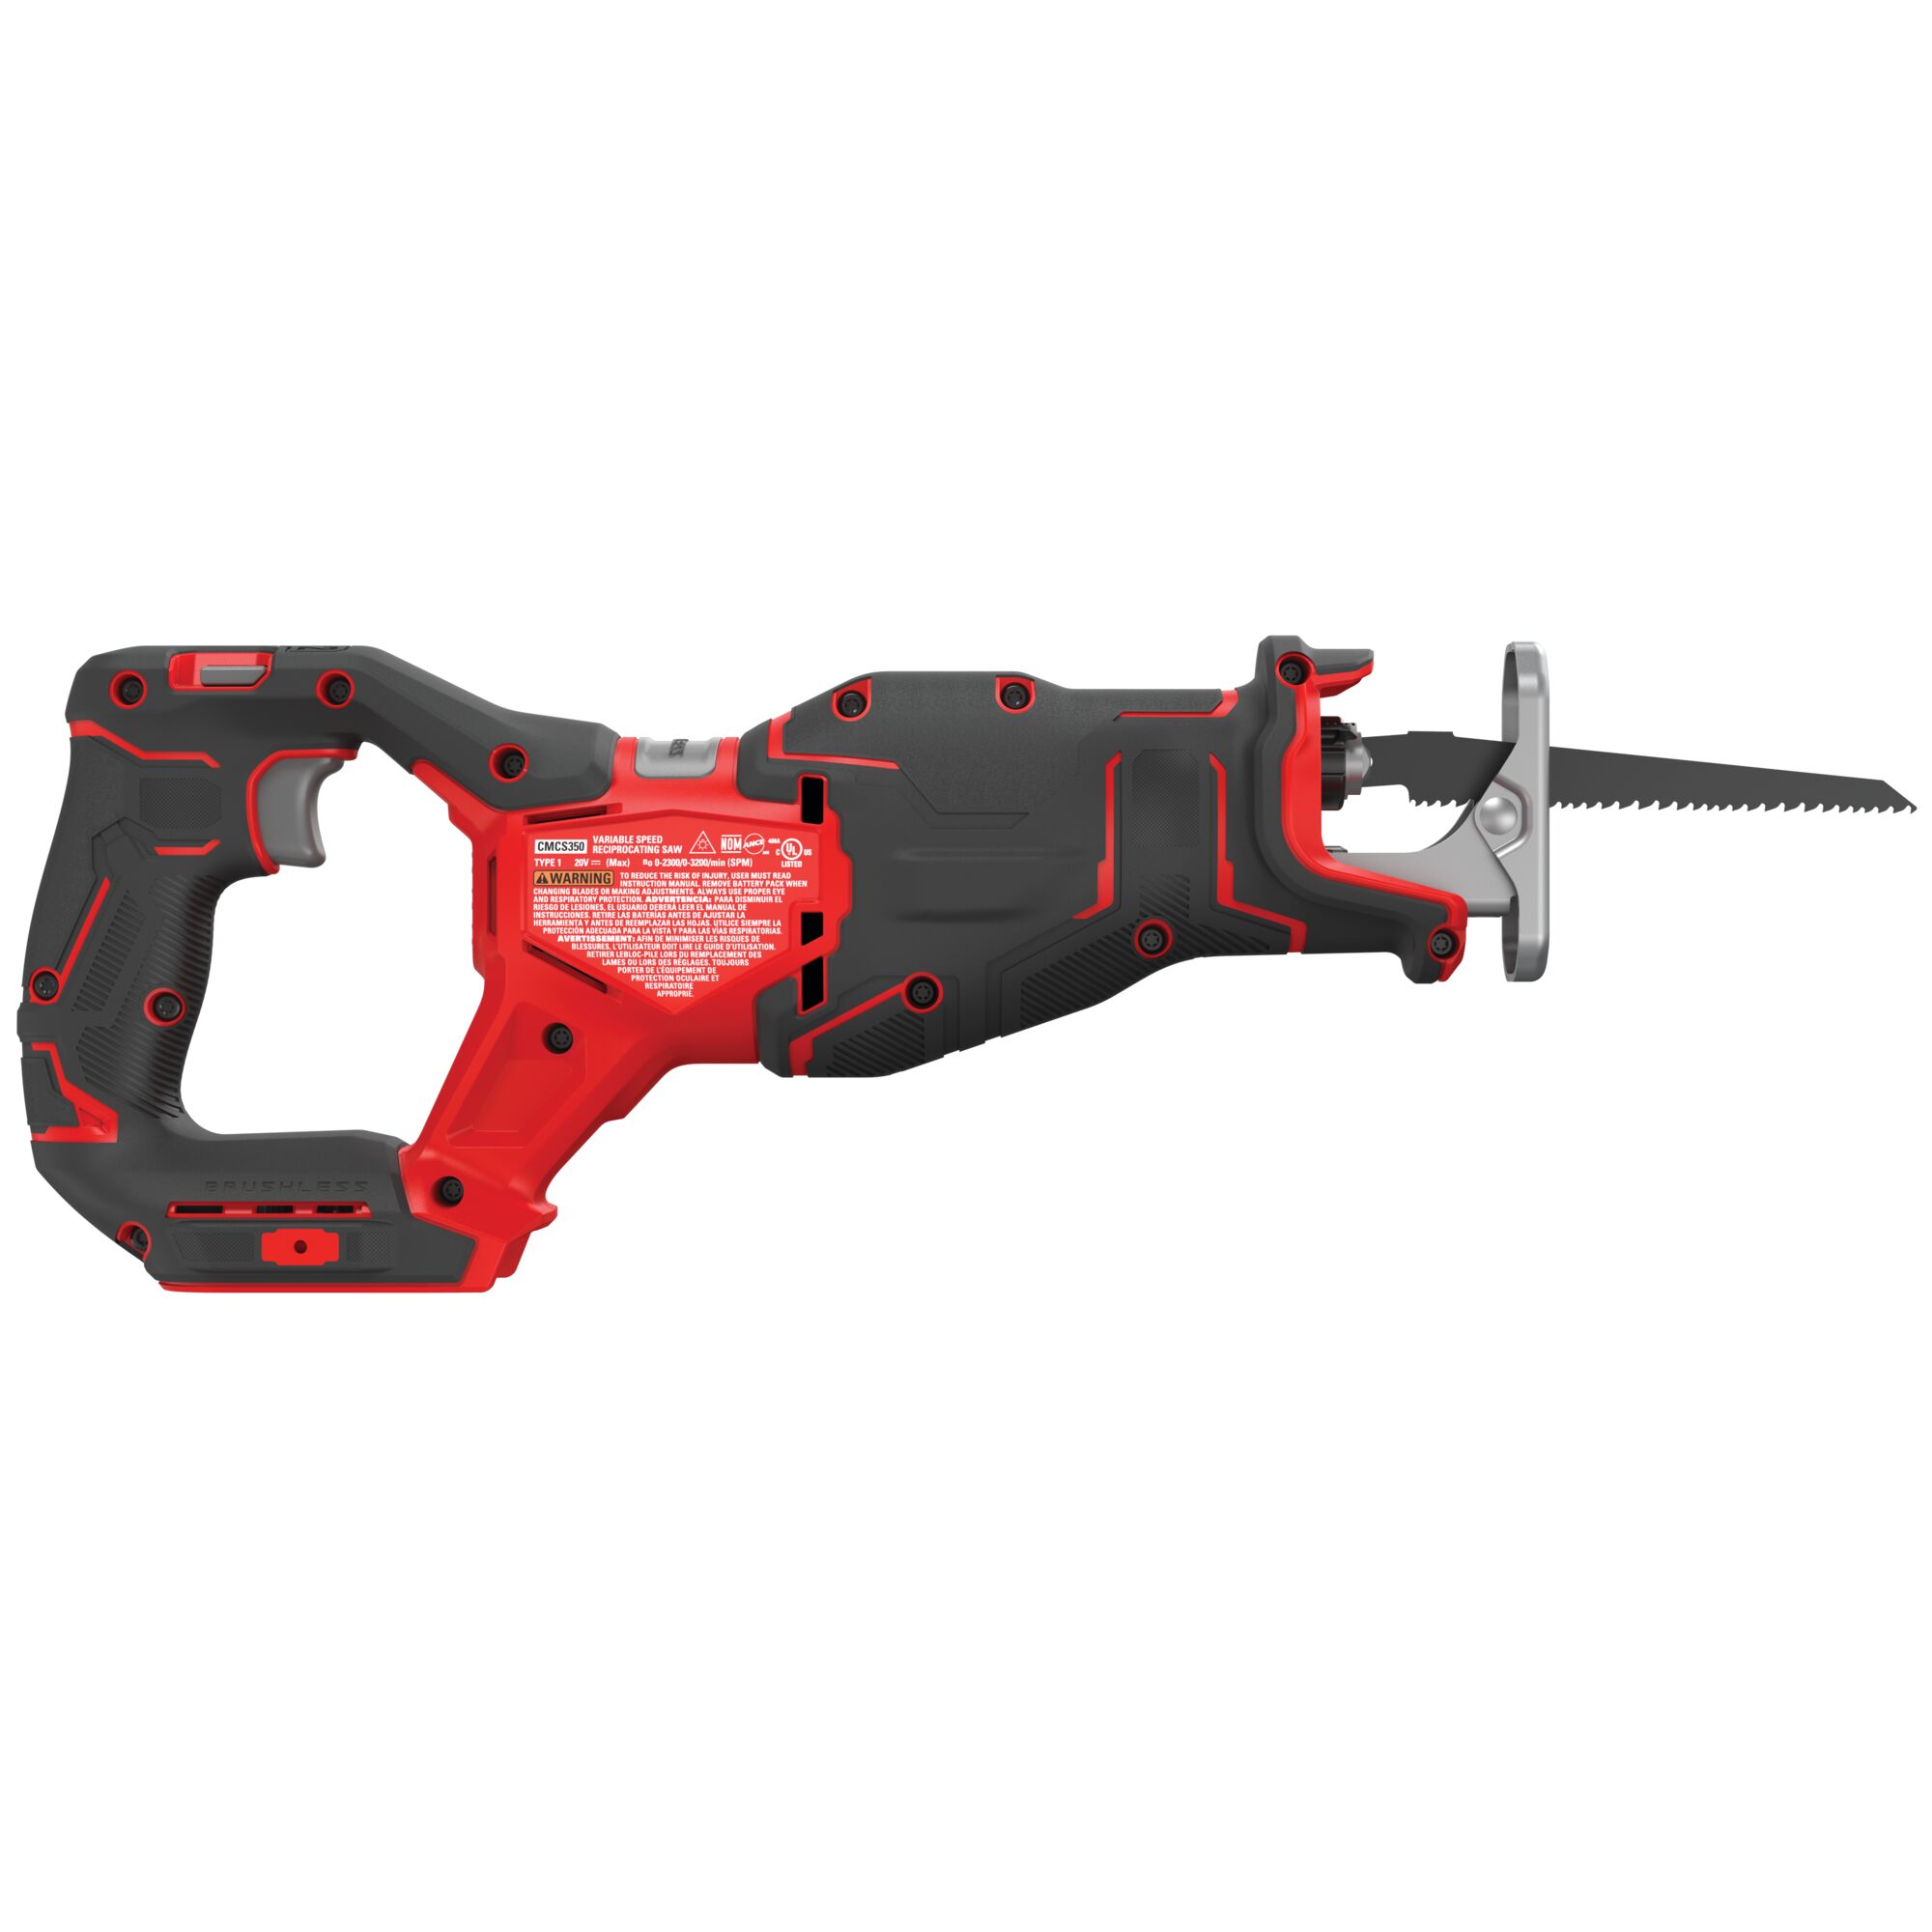 View of CRAFTSMAN Reciprocating Saw on white background